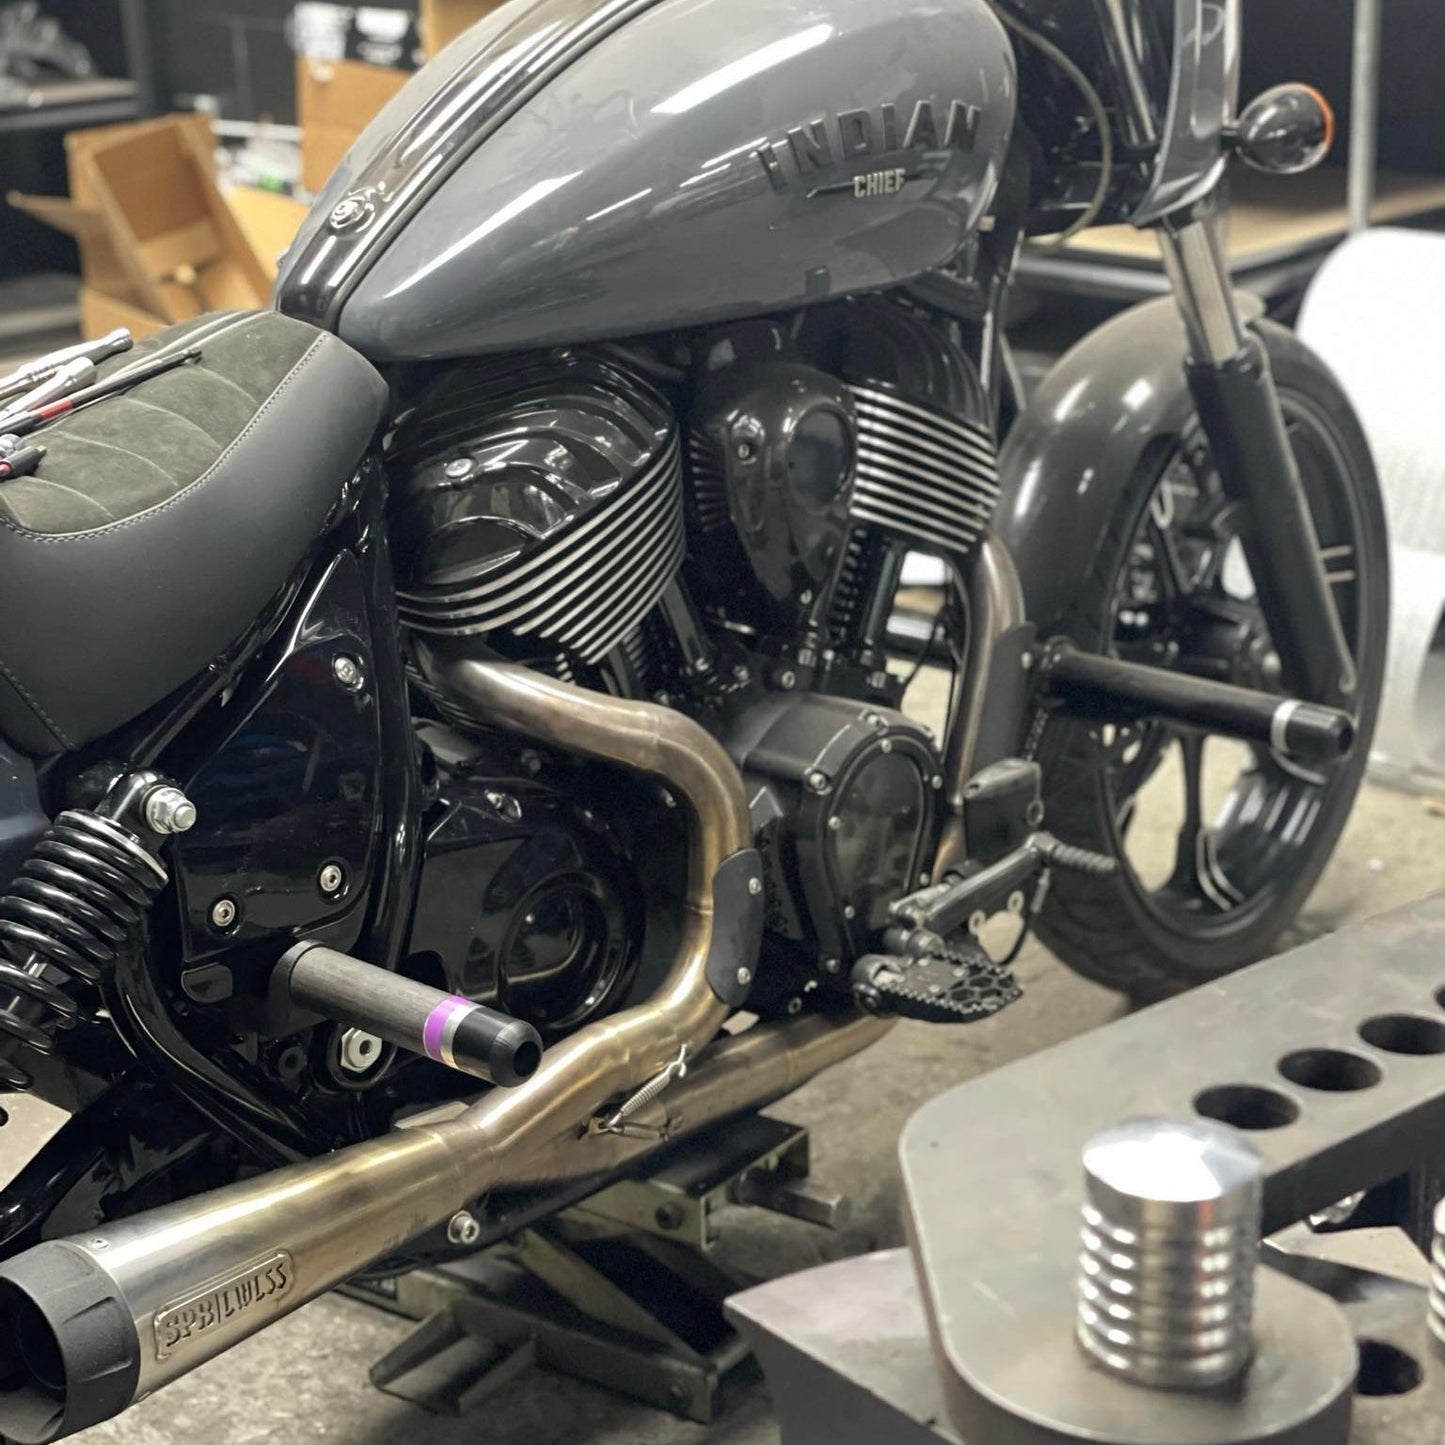 Rear B-Bars/Passenger Pegs for Indian Chief 22 +